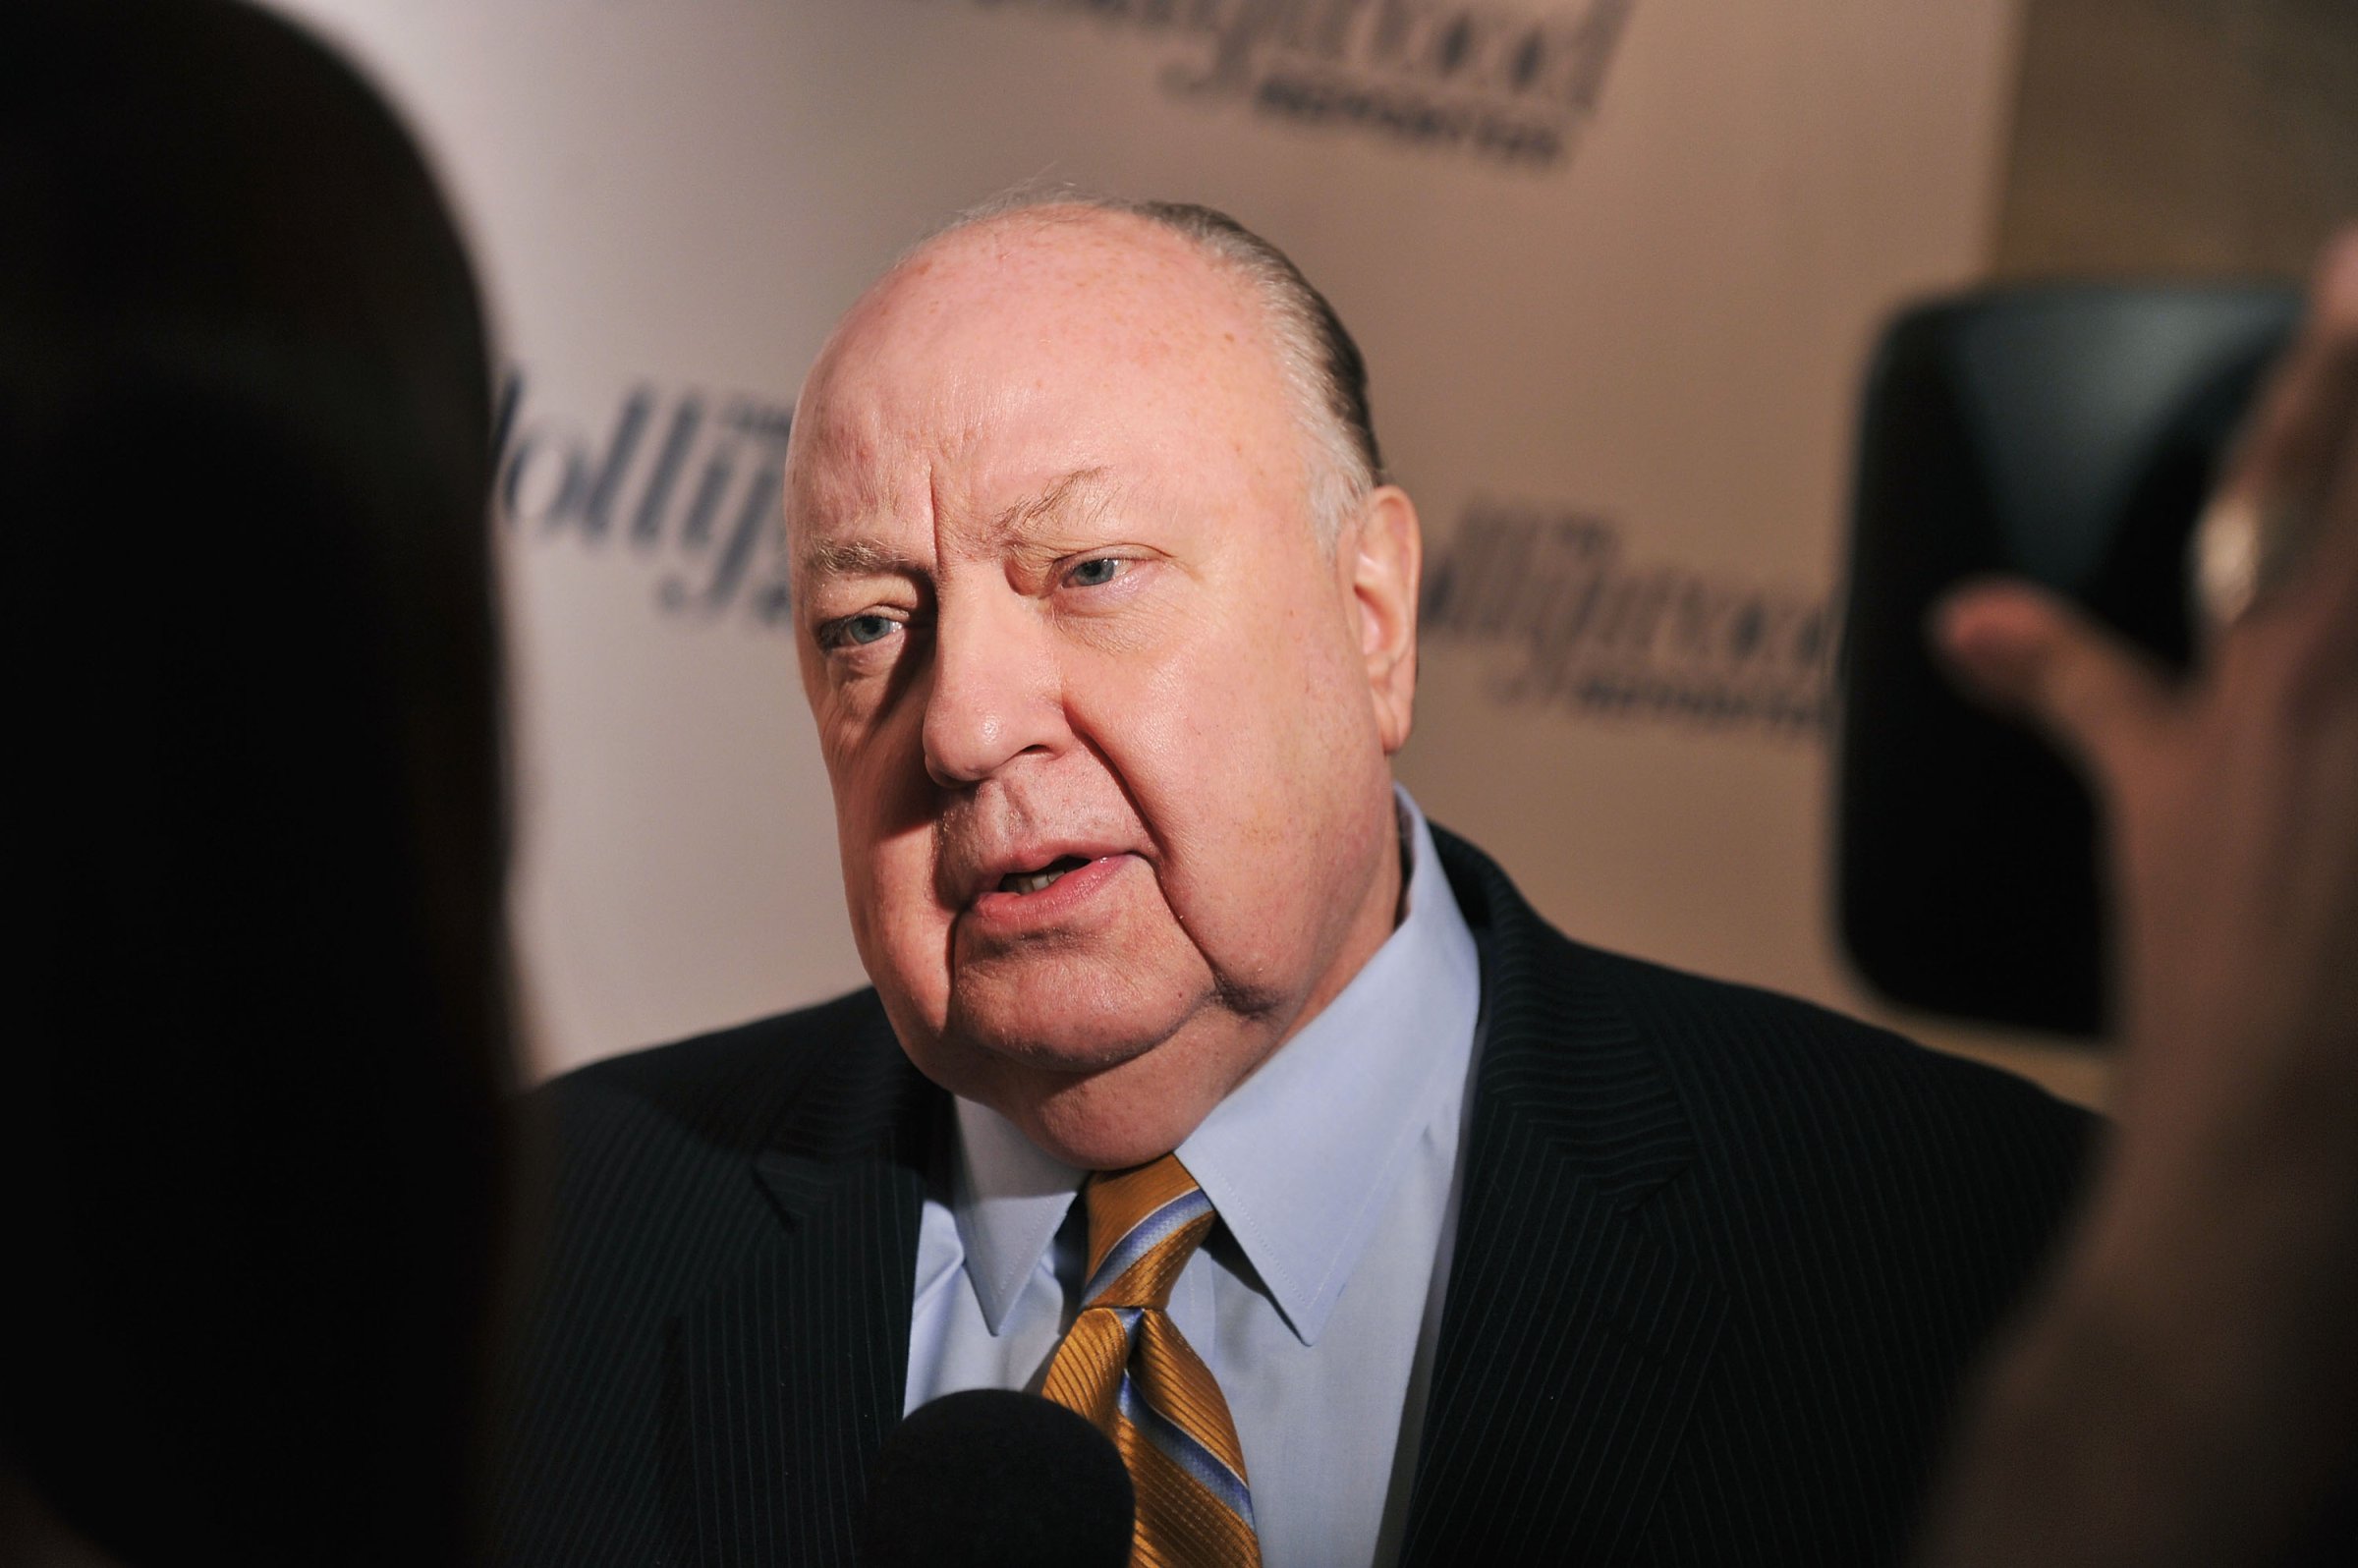 Roger Ailes attends the Hollywood Reporter celebration of "The 35 Most Powerful People in Media" at the Four Season Grill Room in New York City on April 11, 2012.